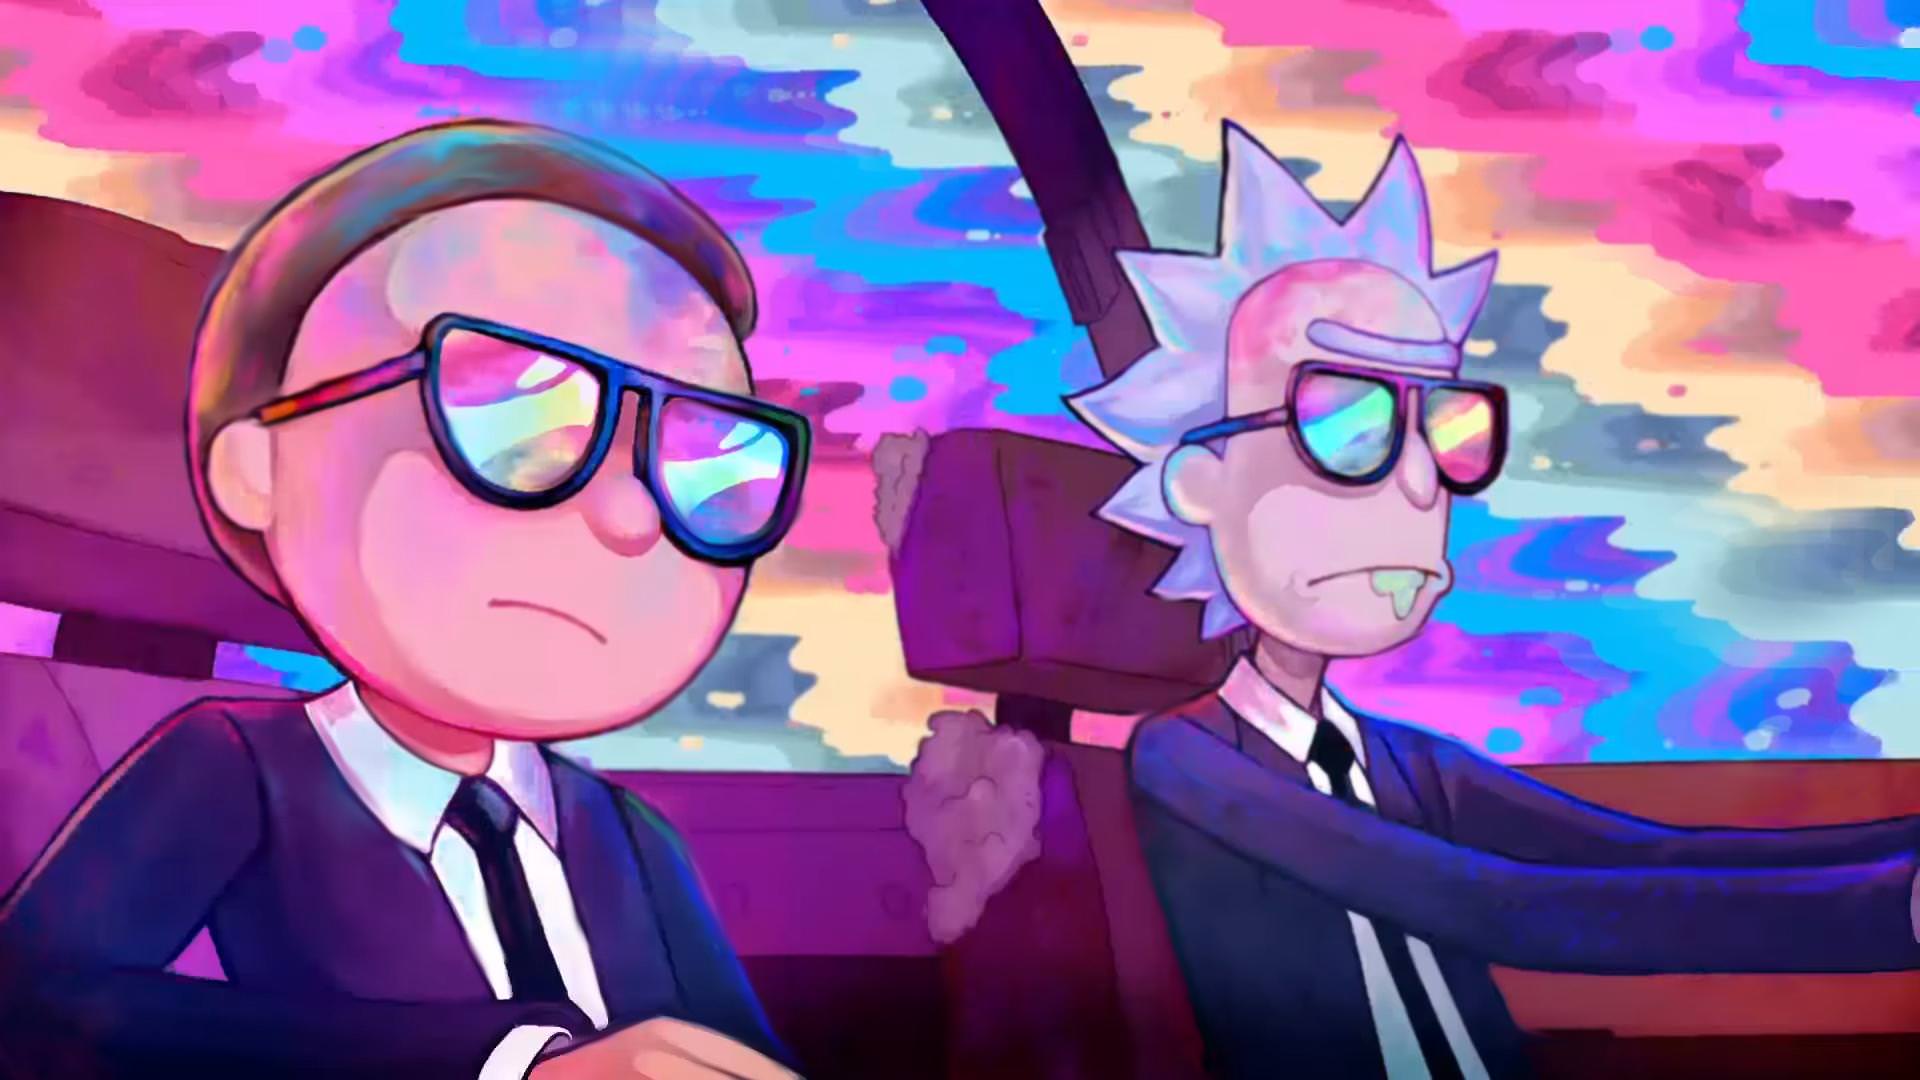 4K Rick and Morty Wallpaper I Created From Run The Jewels